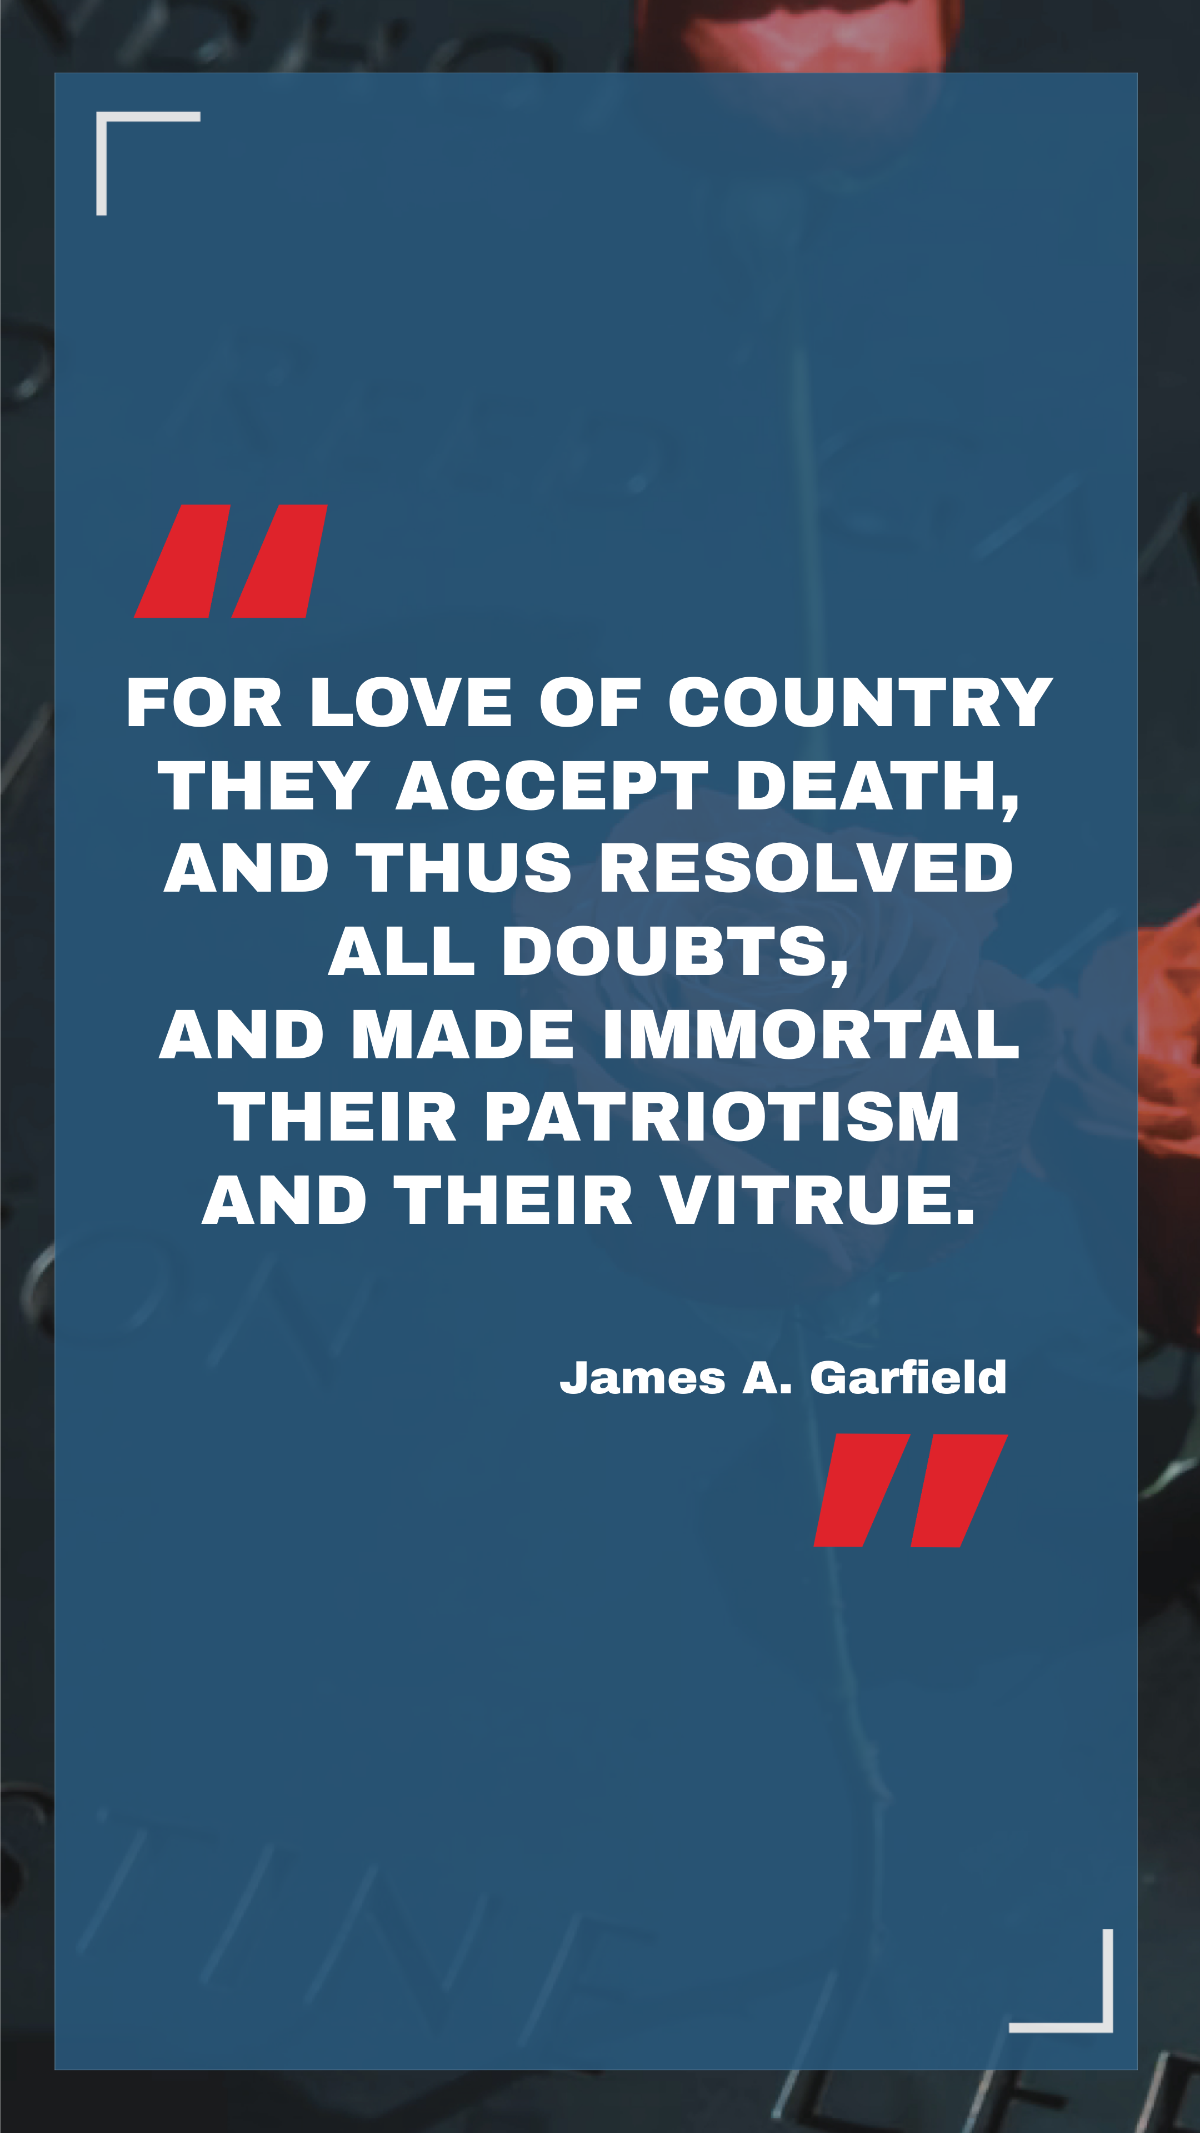 James A. Garfield - For love of country they accepted death, and thus resolved all doubts, and made immortal their patriotism and their virtue.